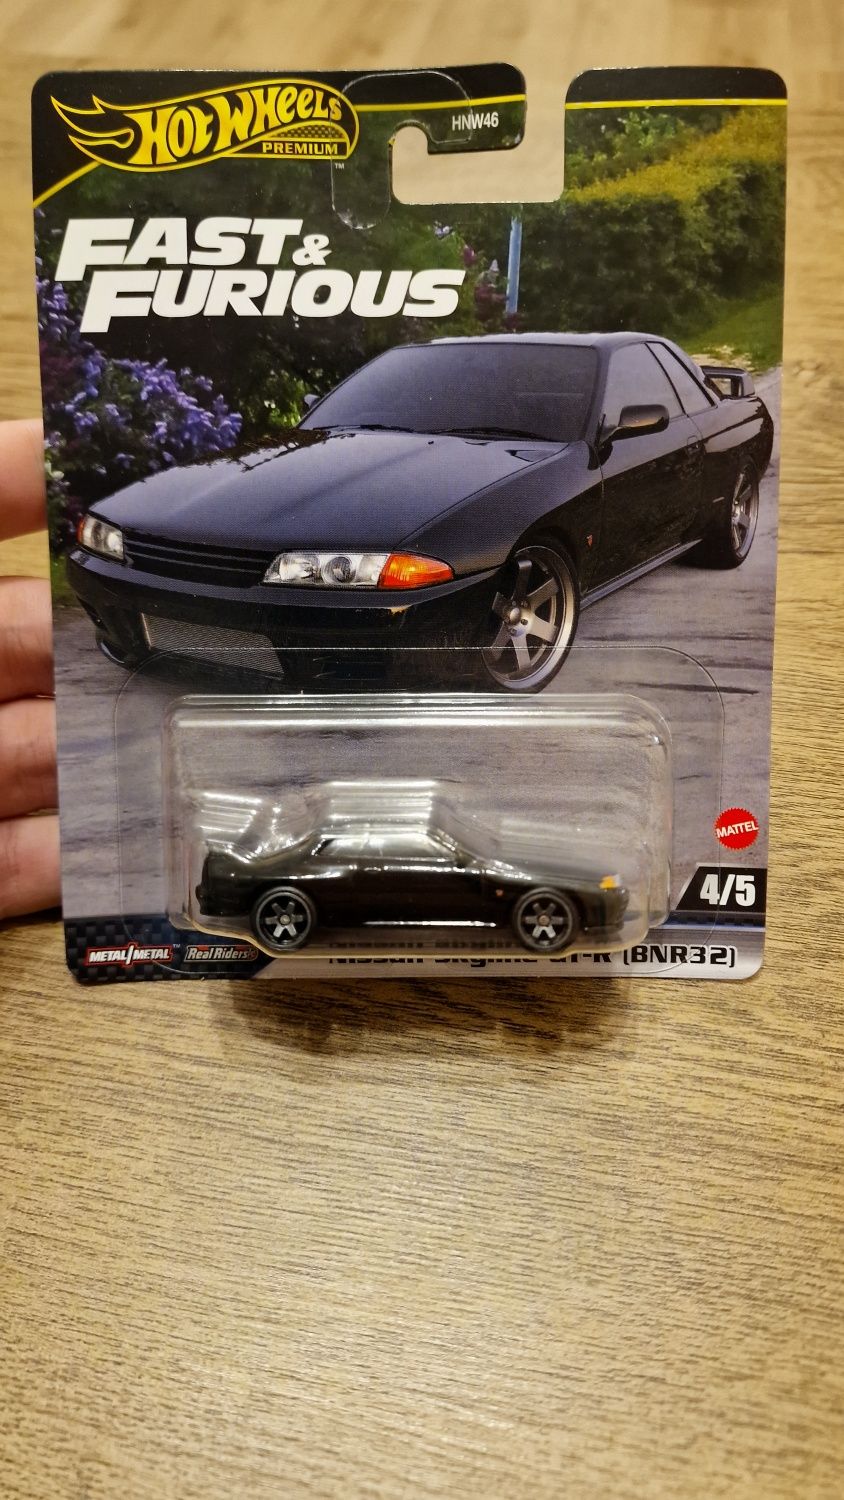 Hot wheels Fast and Furious Nissan BNR32